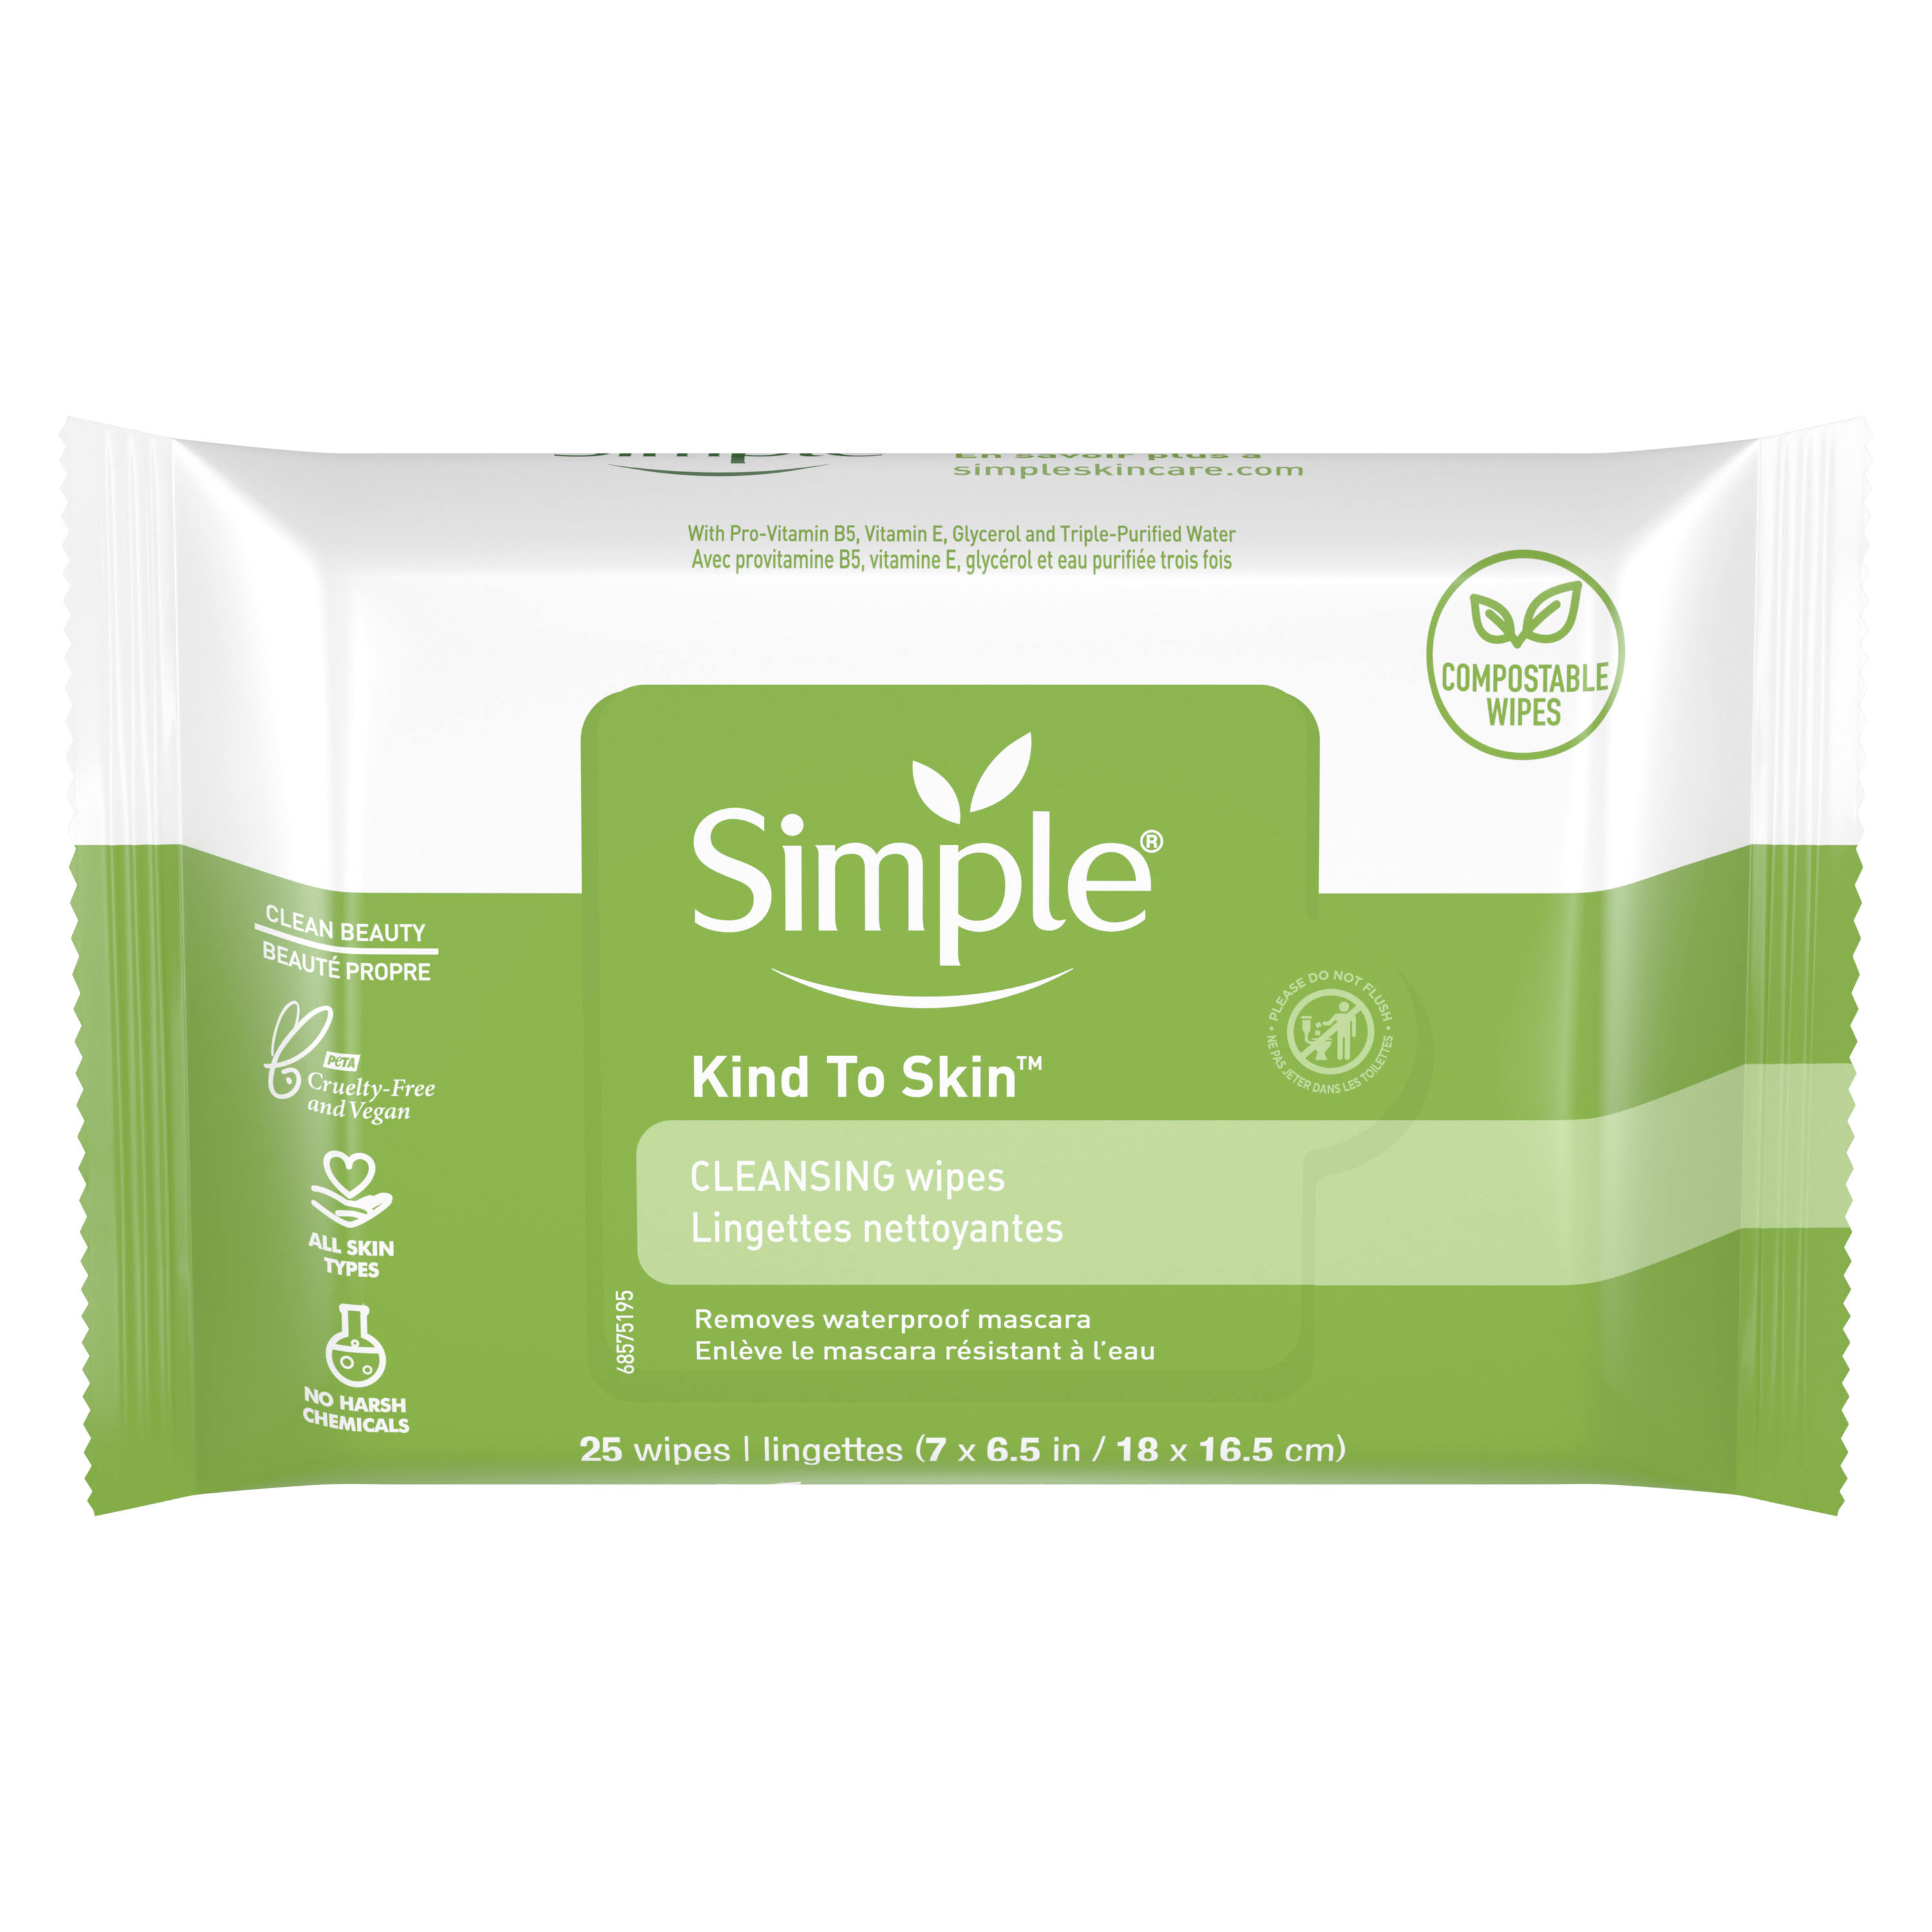 Simple Sensitive Skin Experts Cleansing Facial Wipes - 25 Sheets